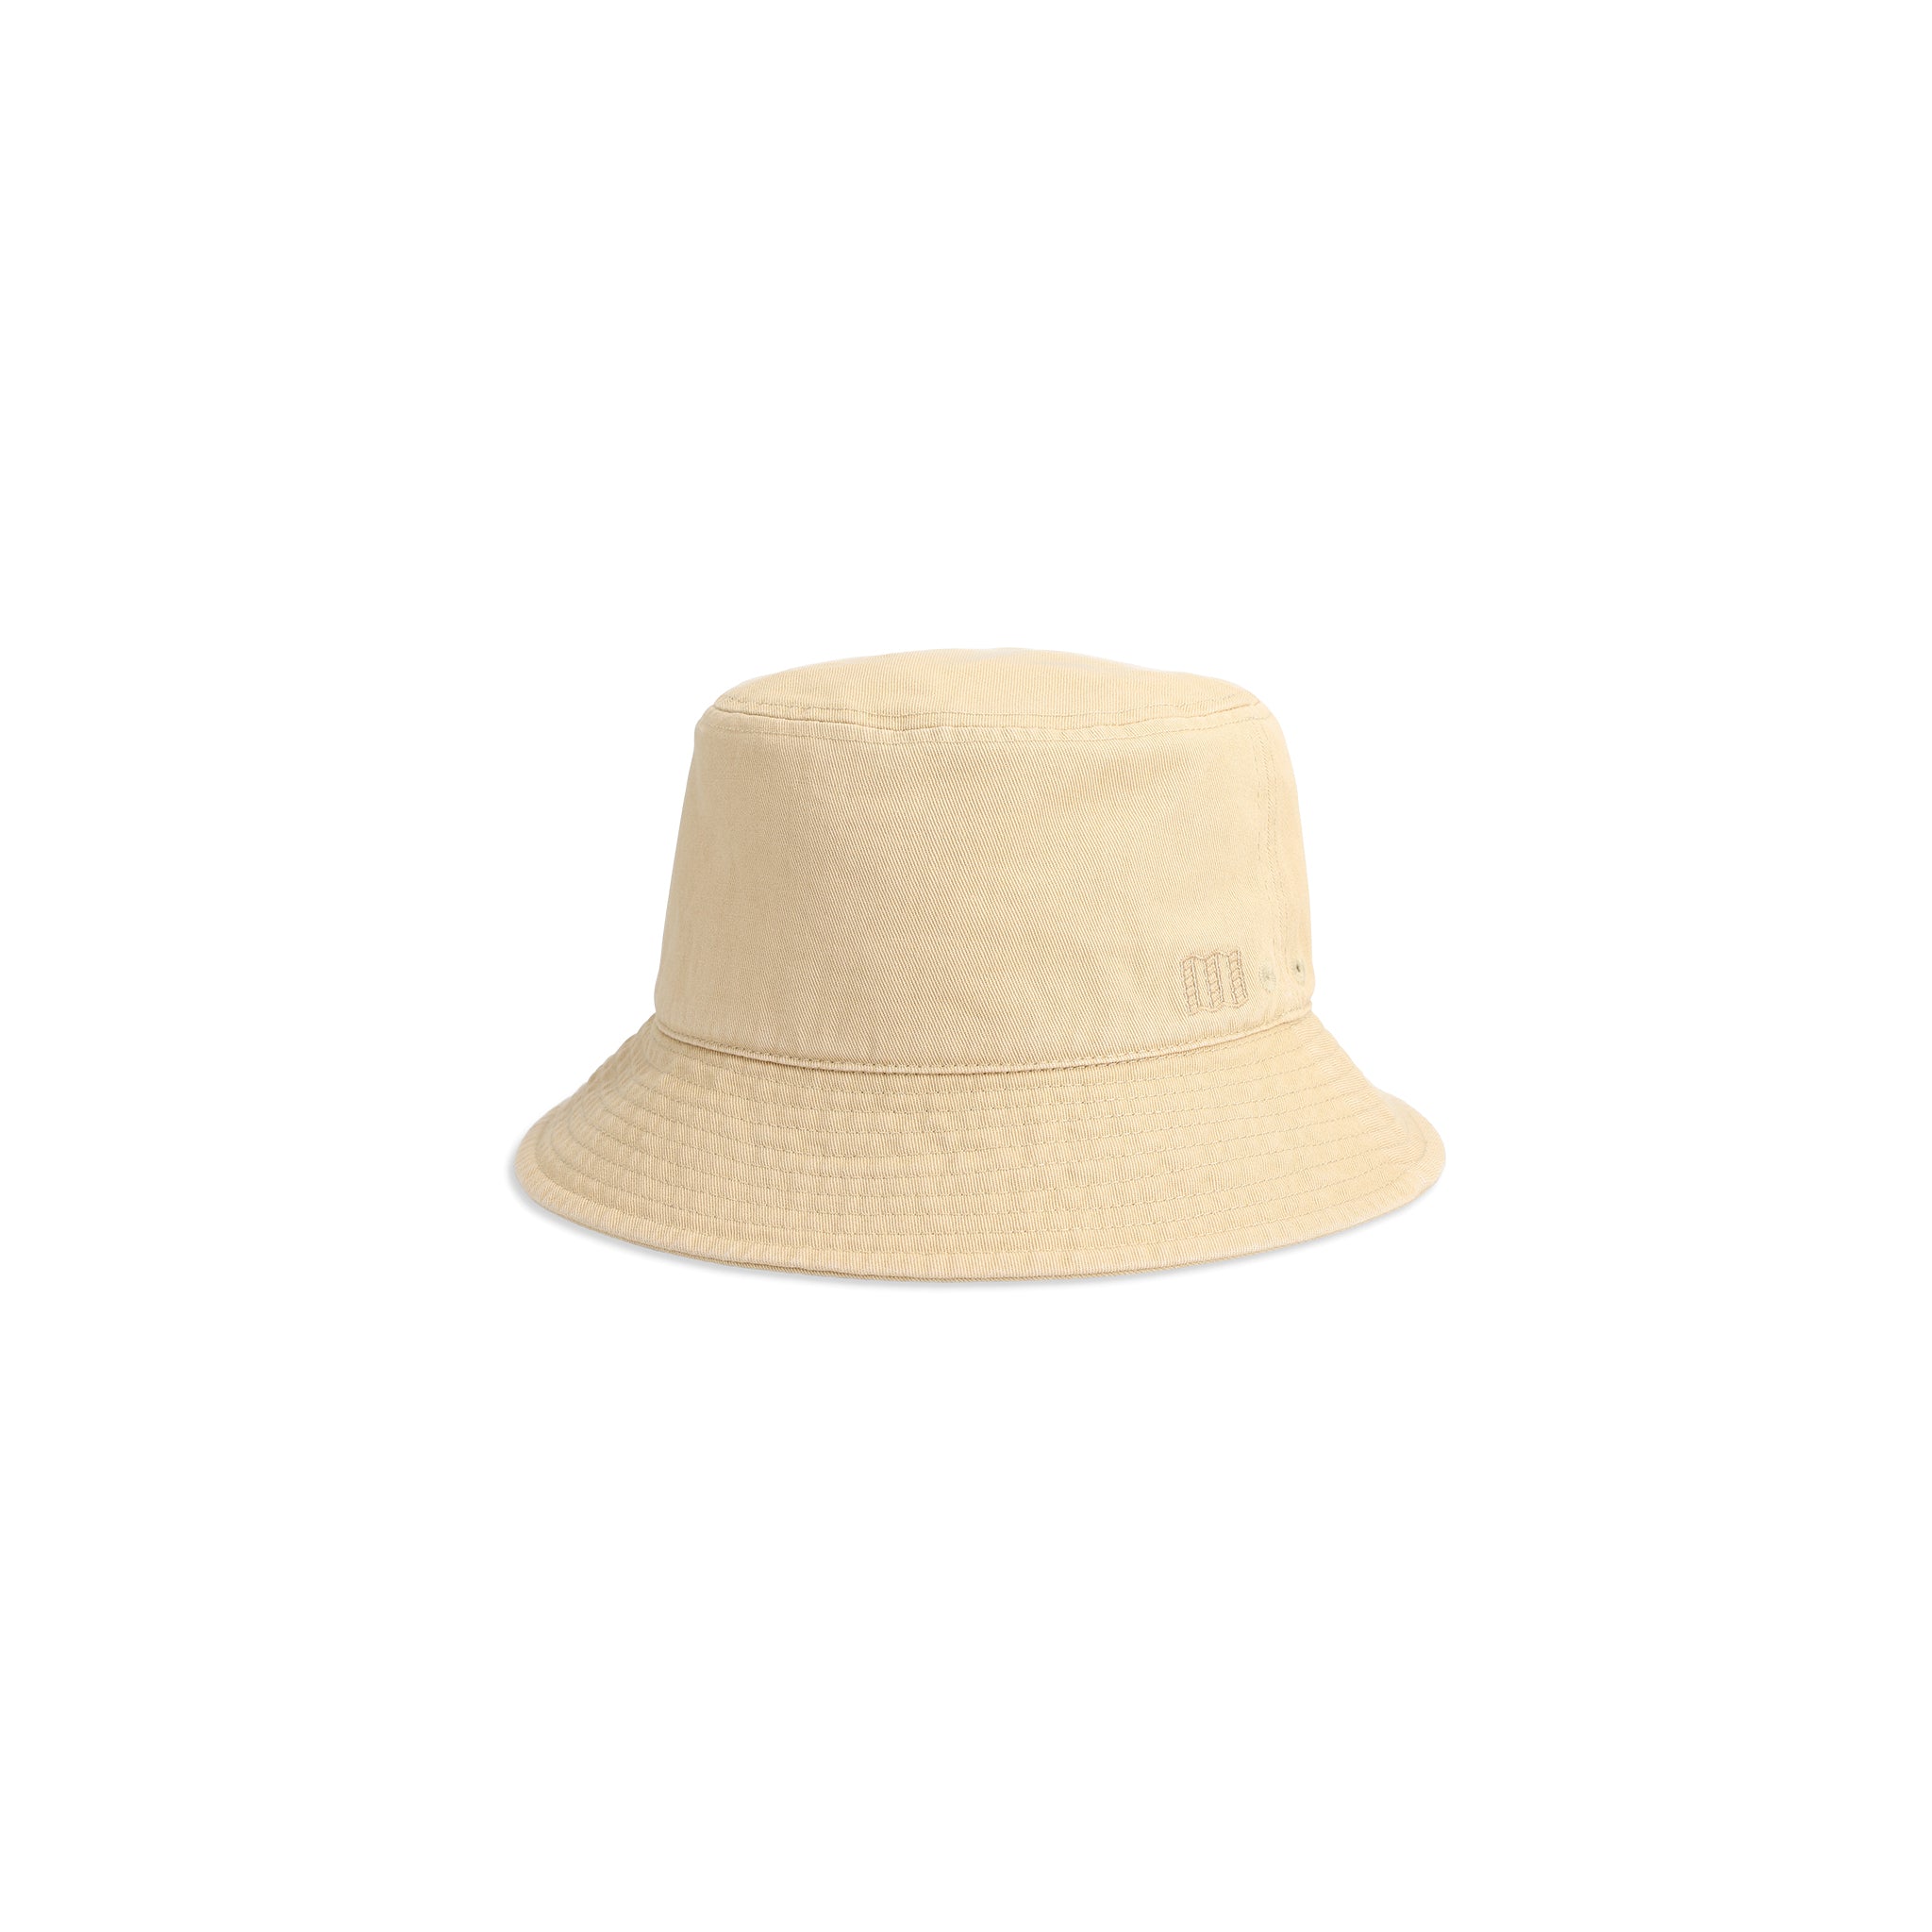 Front View of Topo Designs Dirt Bucket Hat in "Sahara"